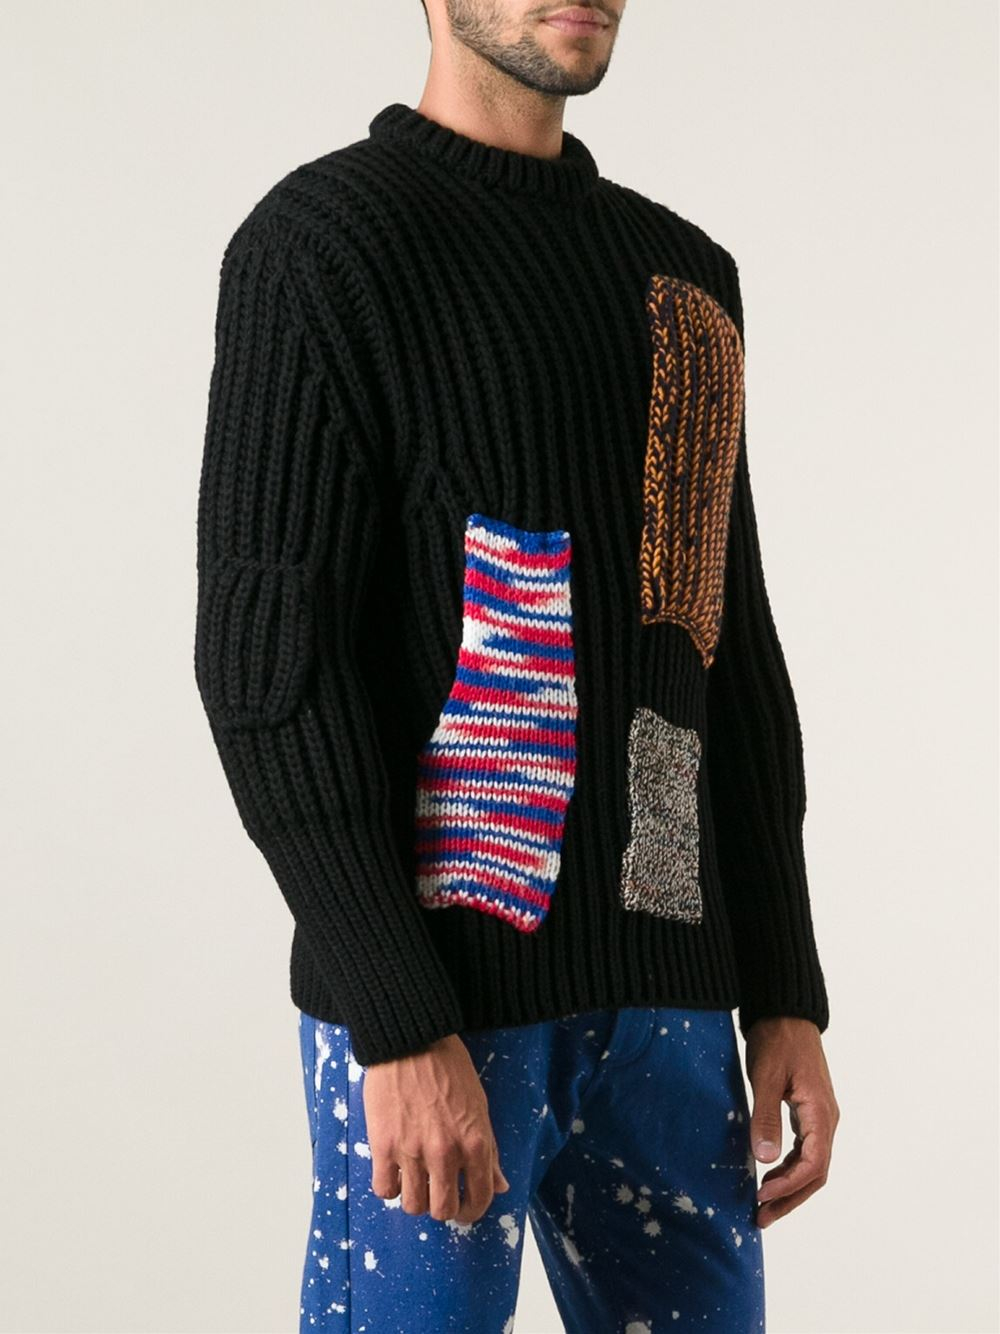 Raf Simons Sterling Ruby Patchwork Sweater in Black for Men - Lyst